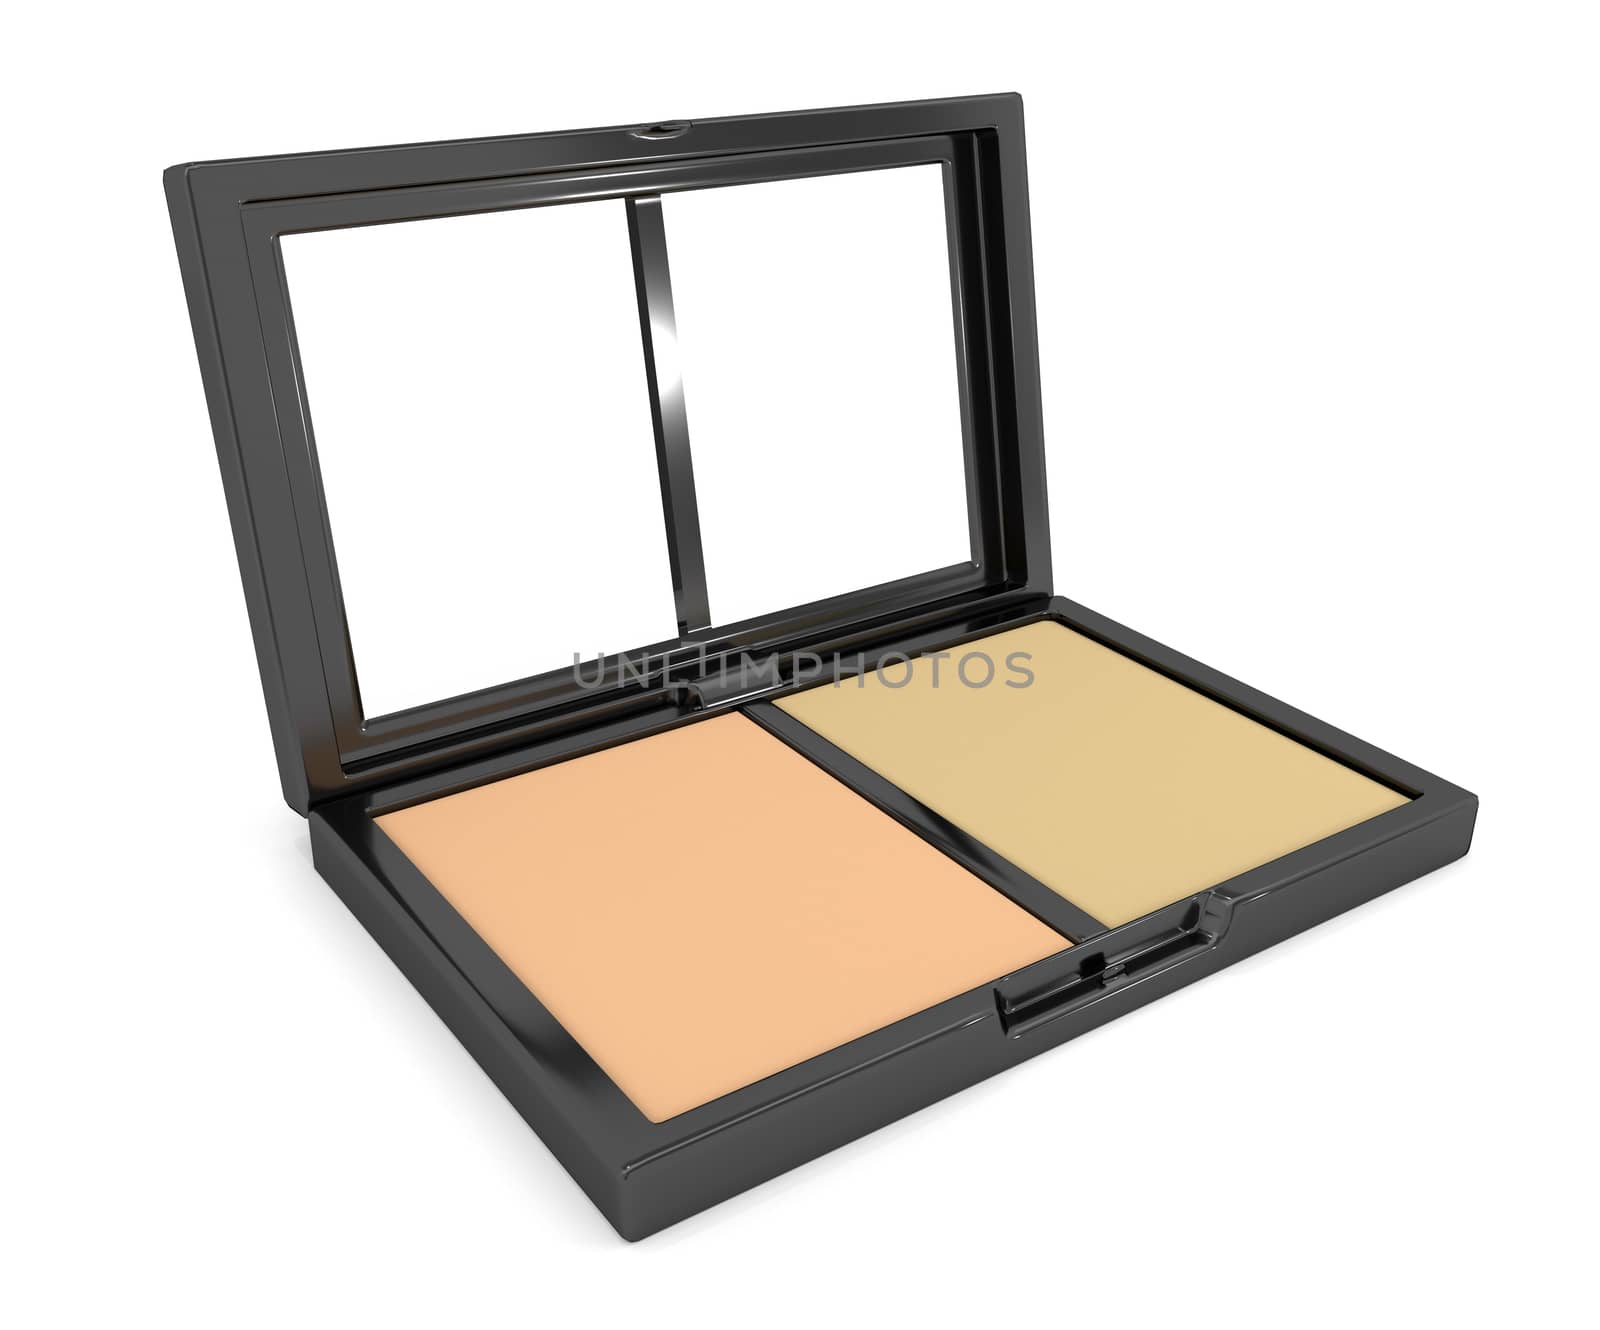 Illustration depicting a cosmetic pressed powder compact arranged over white.